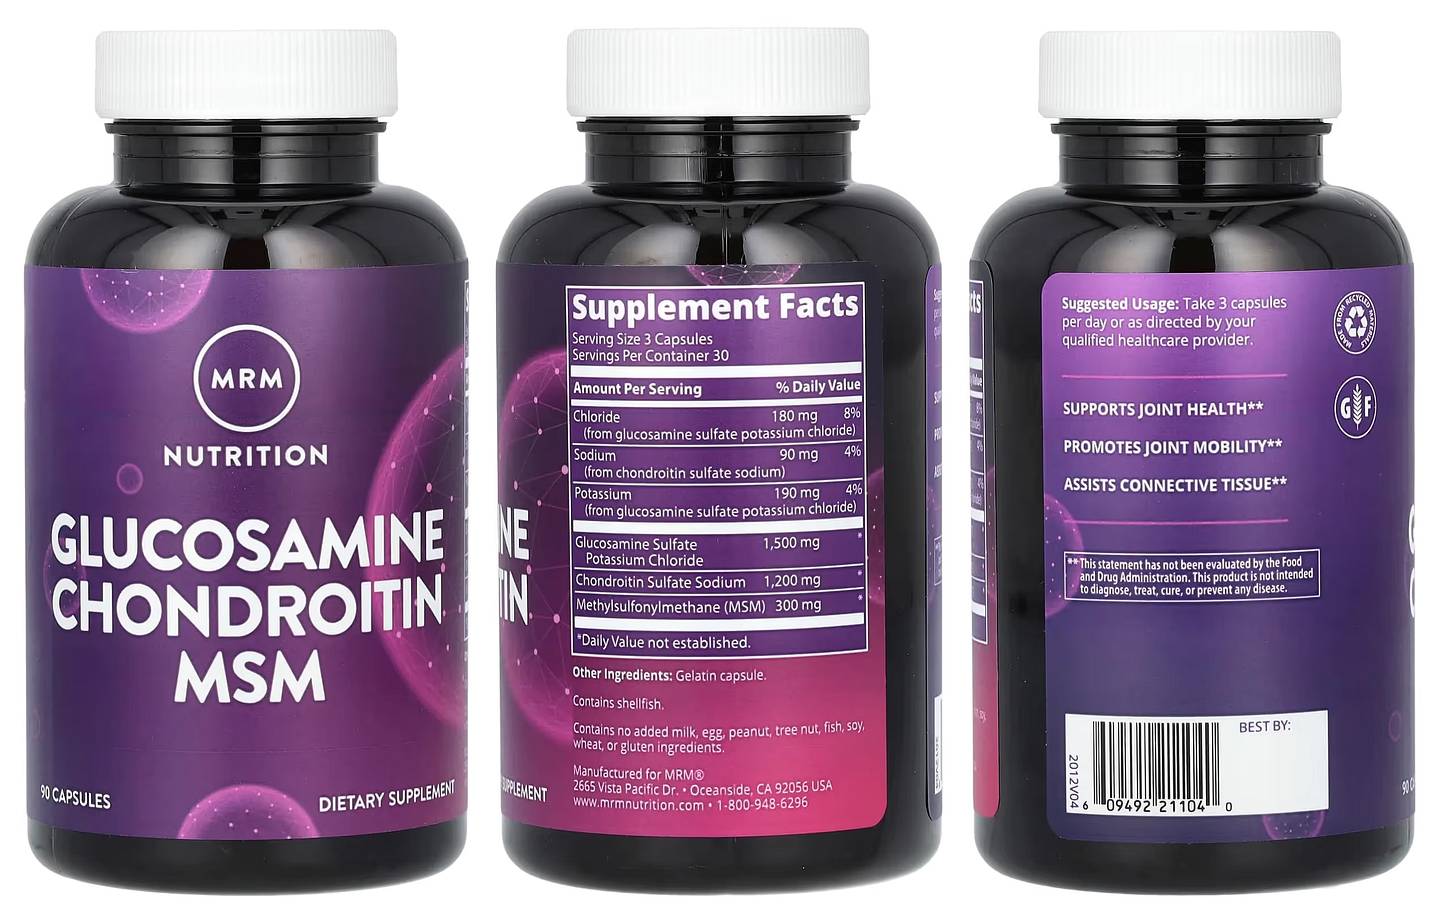 MRM Nutrition, Glucosamine Chondroitin MSM packaging